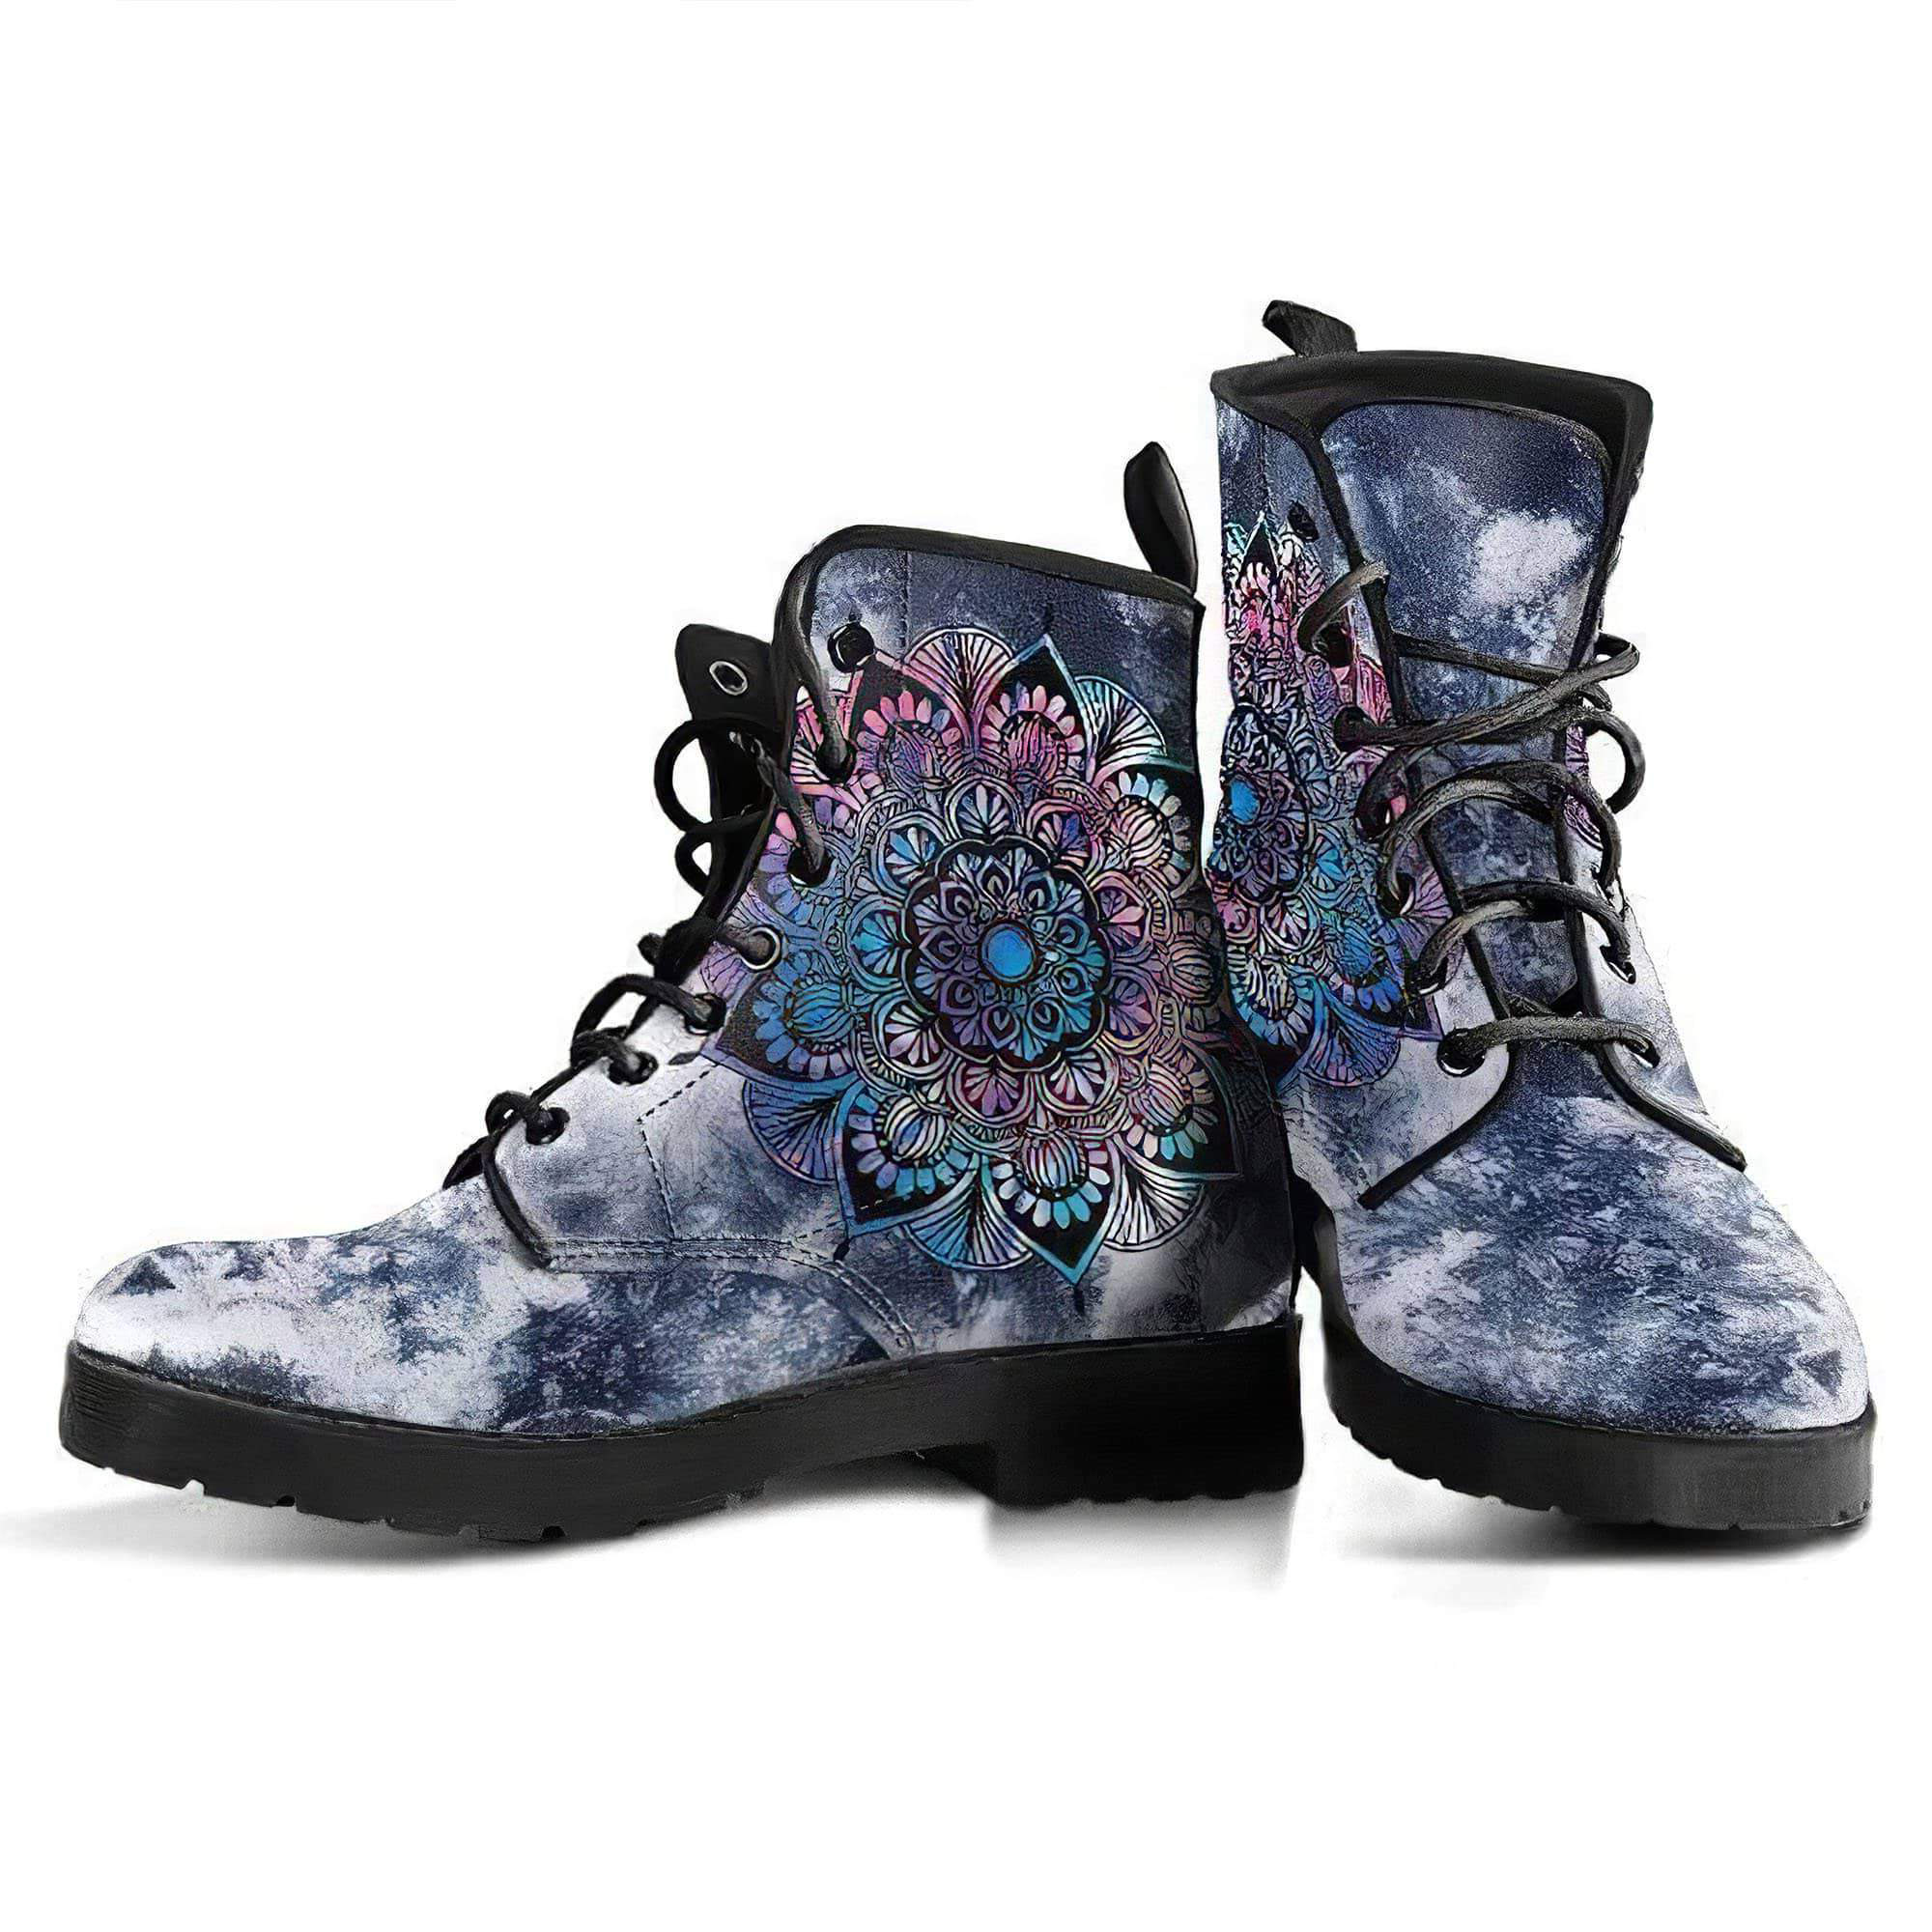 tiedye-mandala-1-handcrafted-boots-women-s-leather-boots-12051965313085.jpg